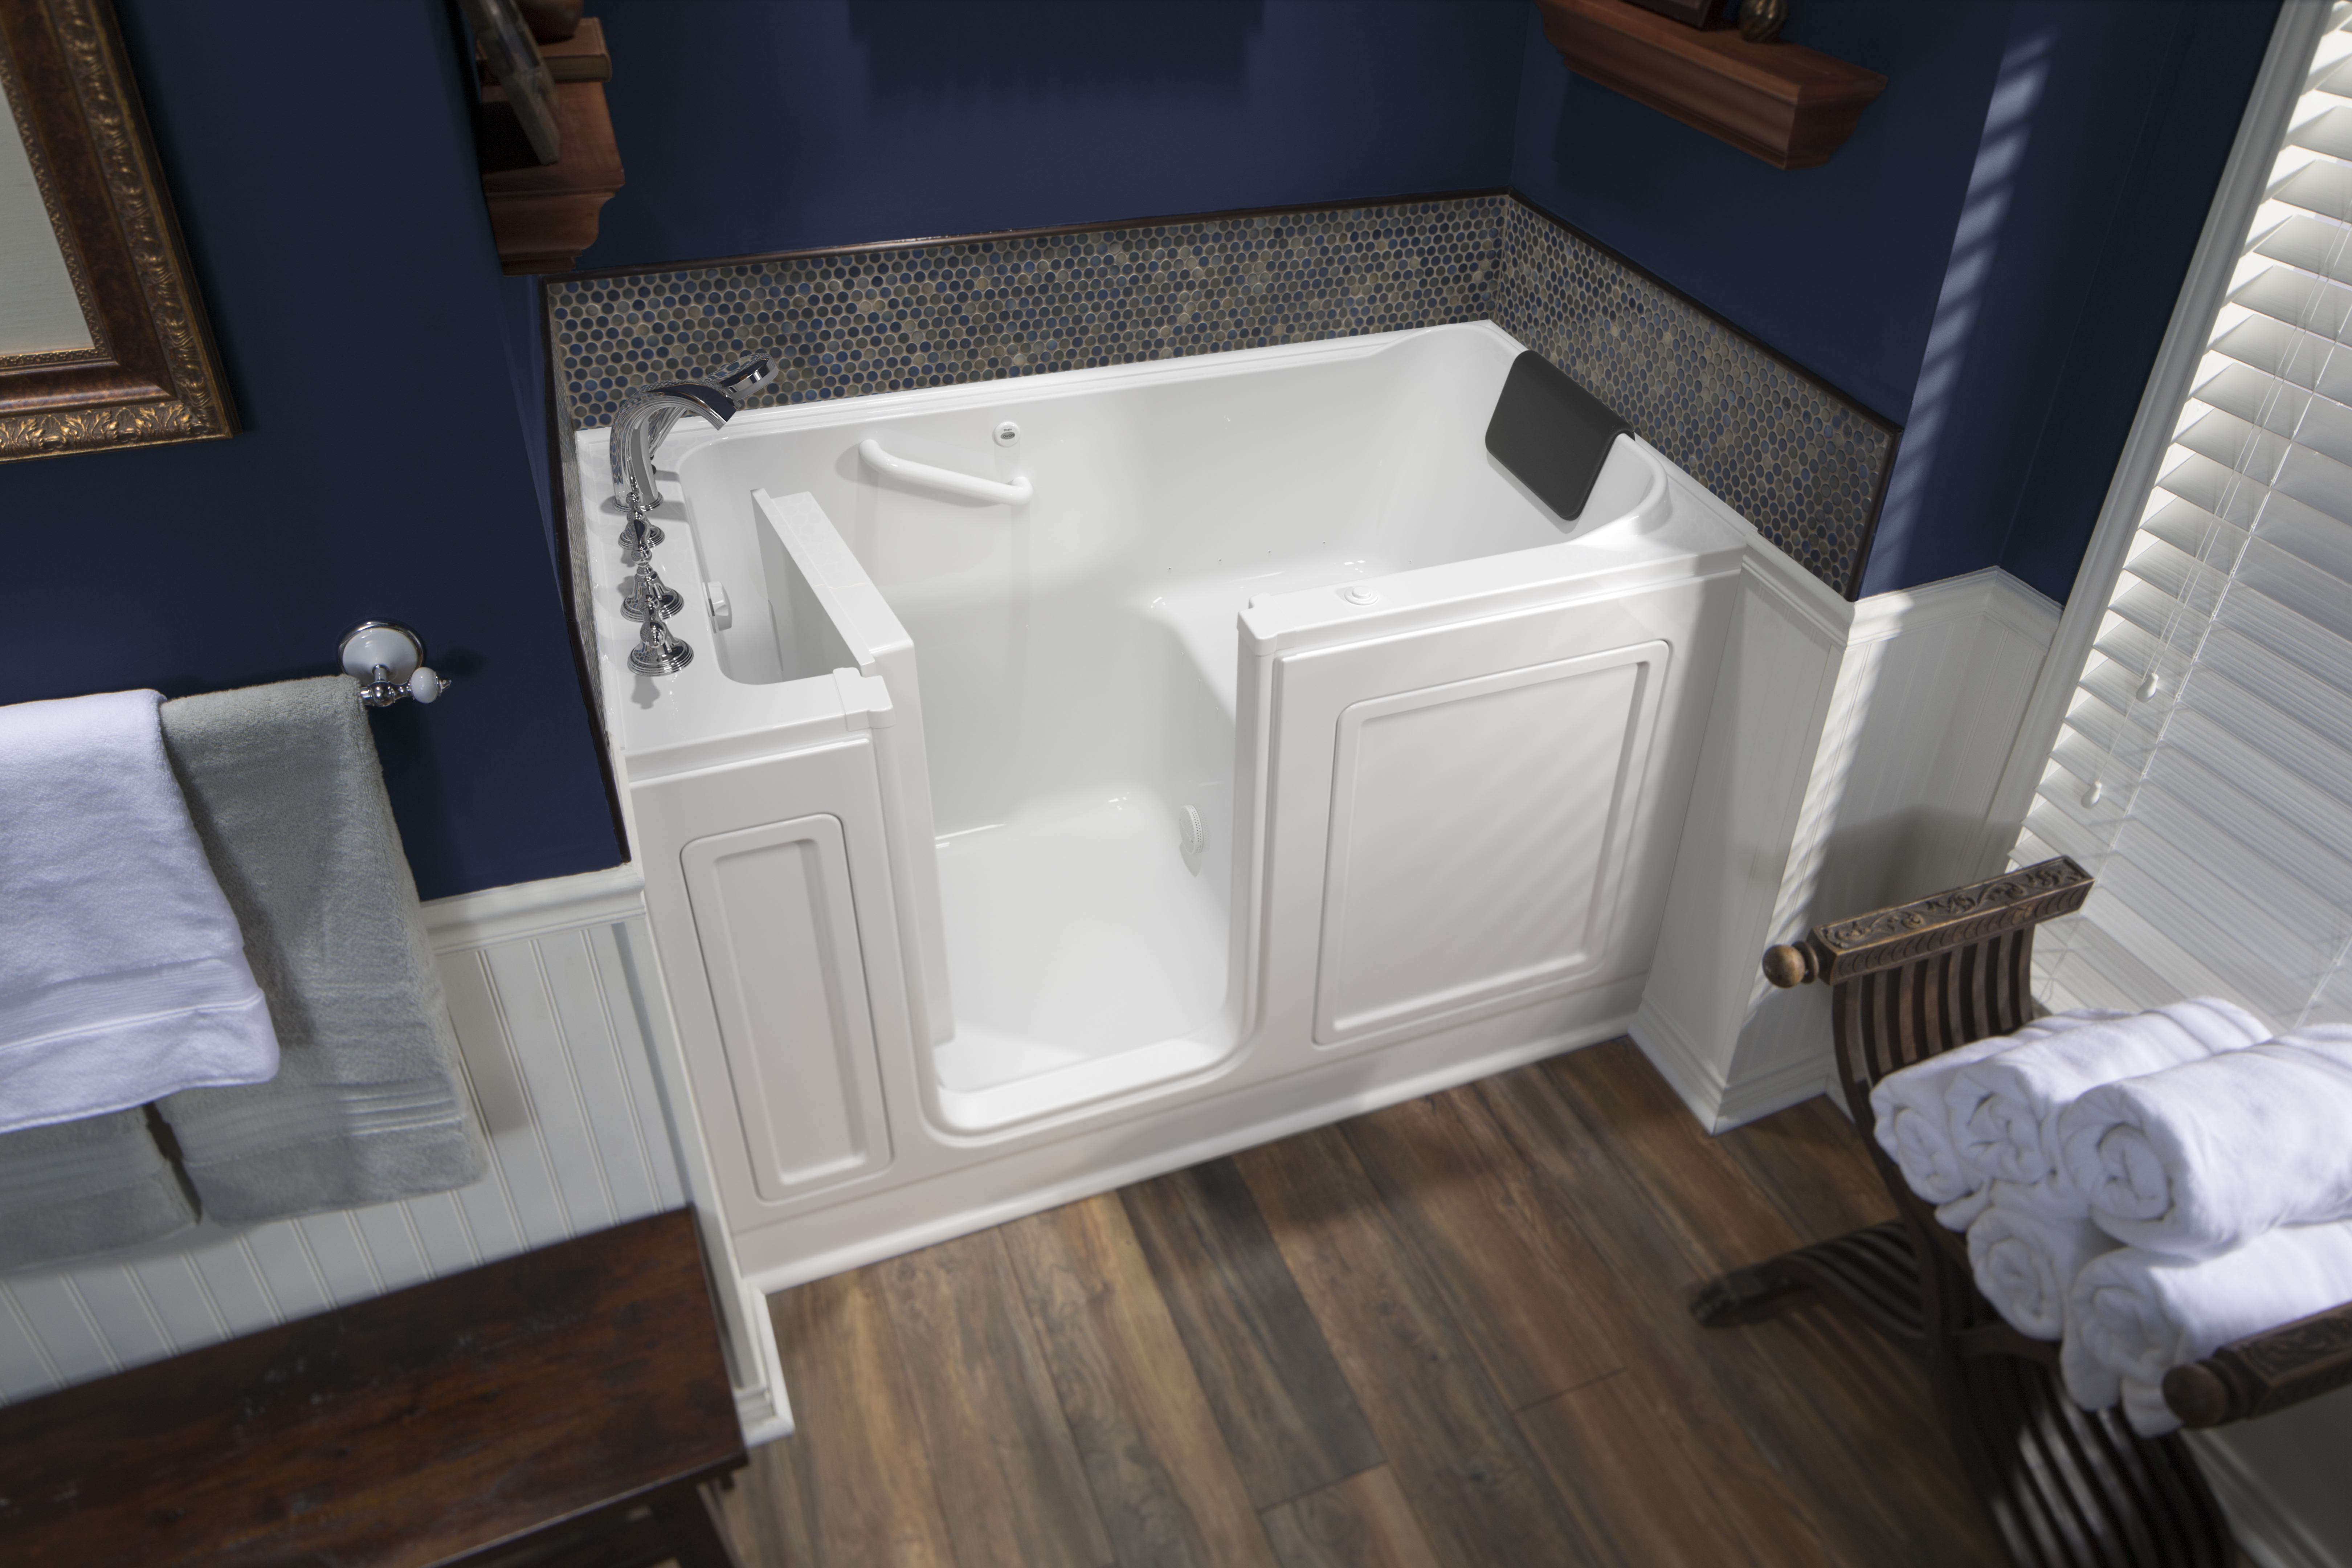 Acrylic Luxury Series 32 x 60 -Inch Walk-in Tub With Air Spa System - Left-Hand Drain With Faucet